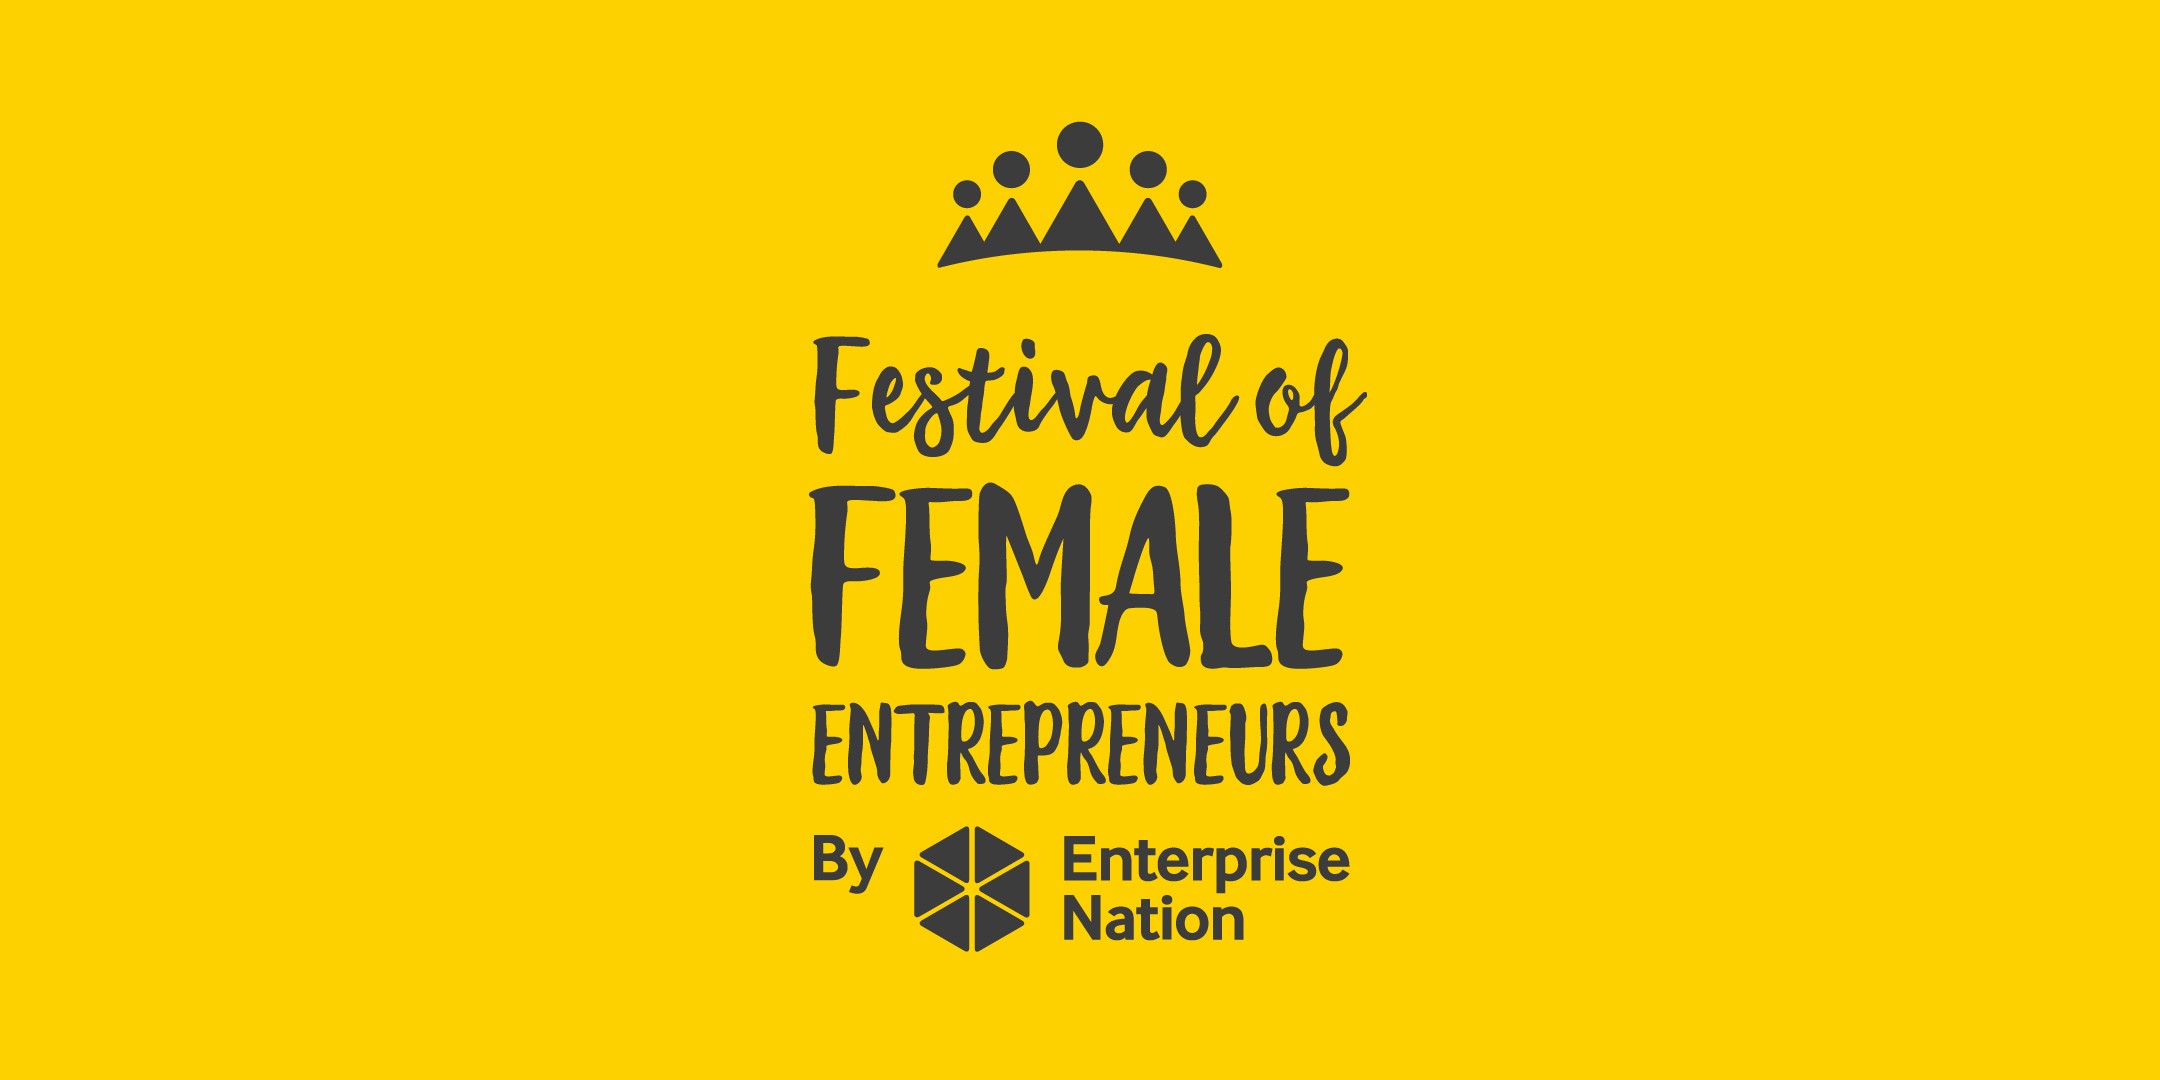 Less than three weeks to go to the 2018 Festival of Female Entrepreneurs